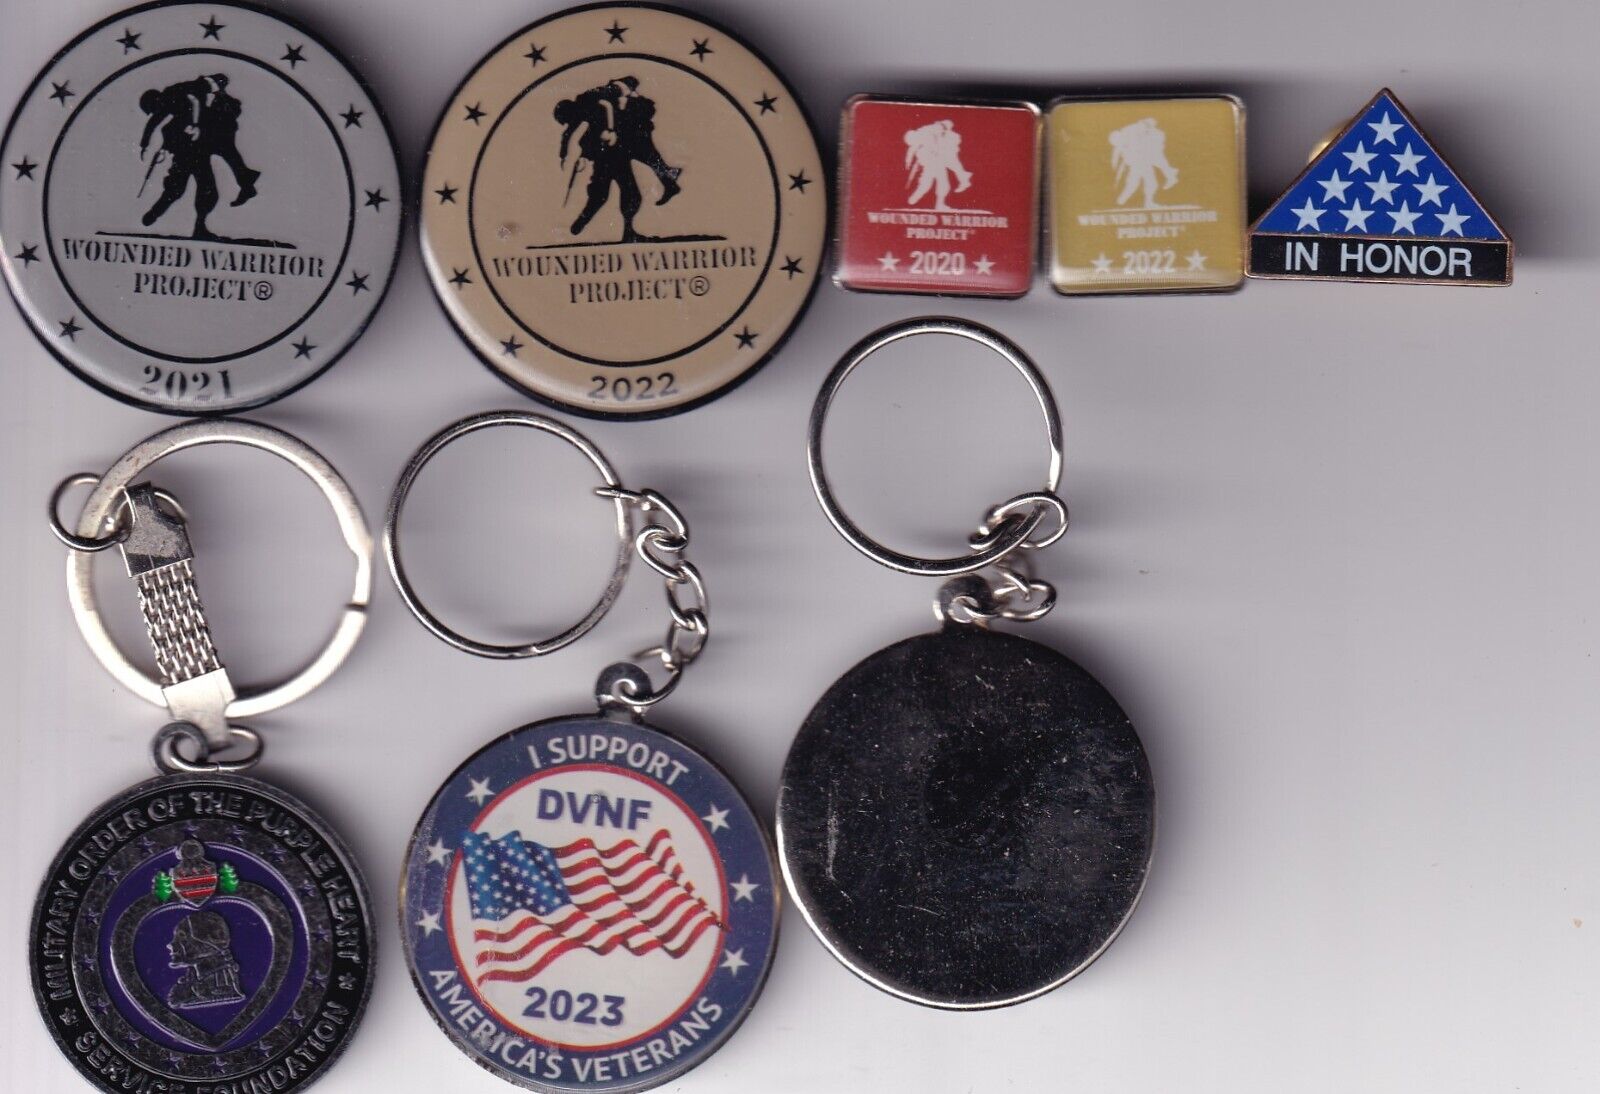 Lot of 8 VETERAN SUPPORT Pins / Key Chains - Wounded Warrior Project / DVNF +